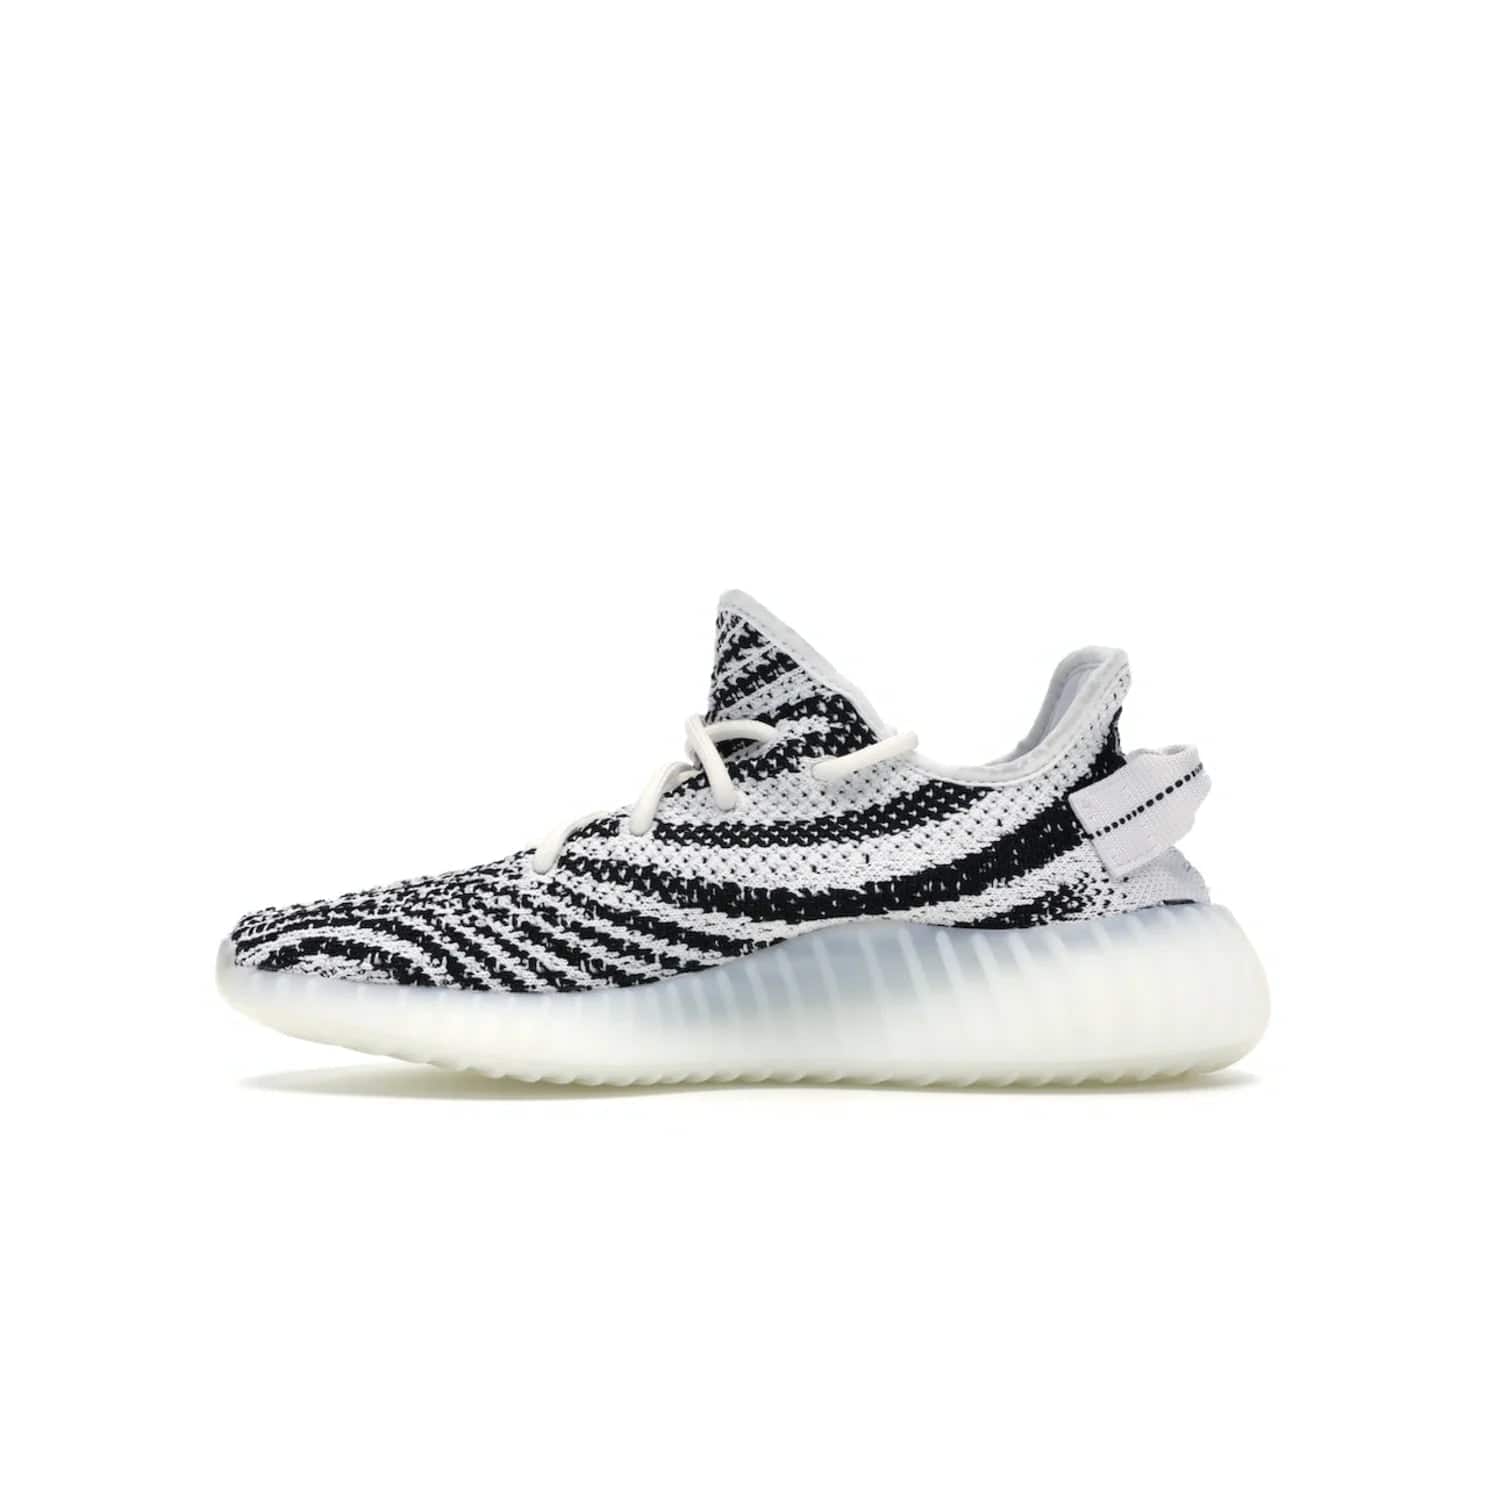 adidas Yeezy Boost 350 V2 Zebra - Image 19 - Only at www.BallersClubKickz.com - #
Score the iconic adidas Yeezy Boost 350 V2 Zebra for a fashionable addition to your street-style. Featuring a Primeknit upper and Boost sole, you'll look great and feel comfortable with every step.